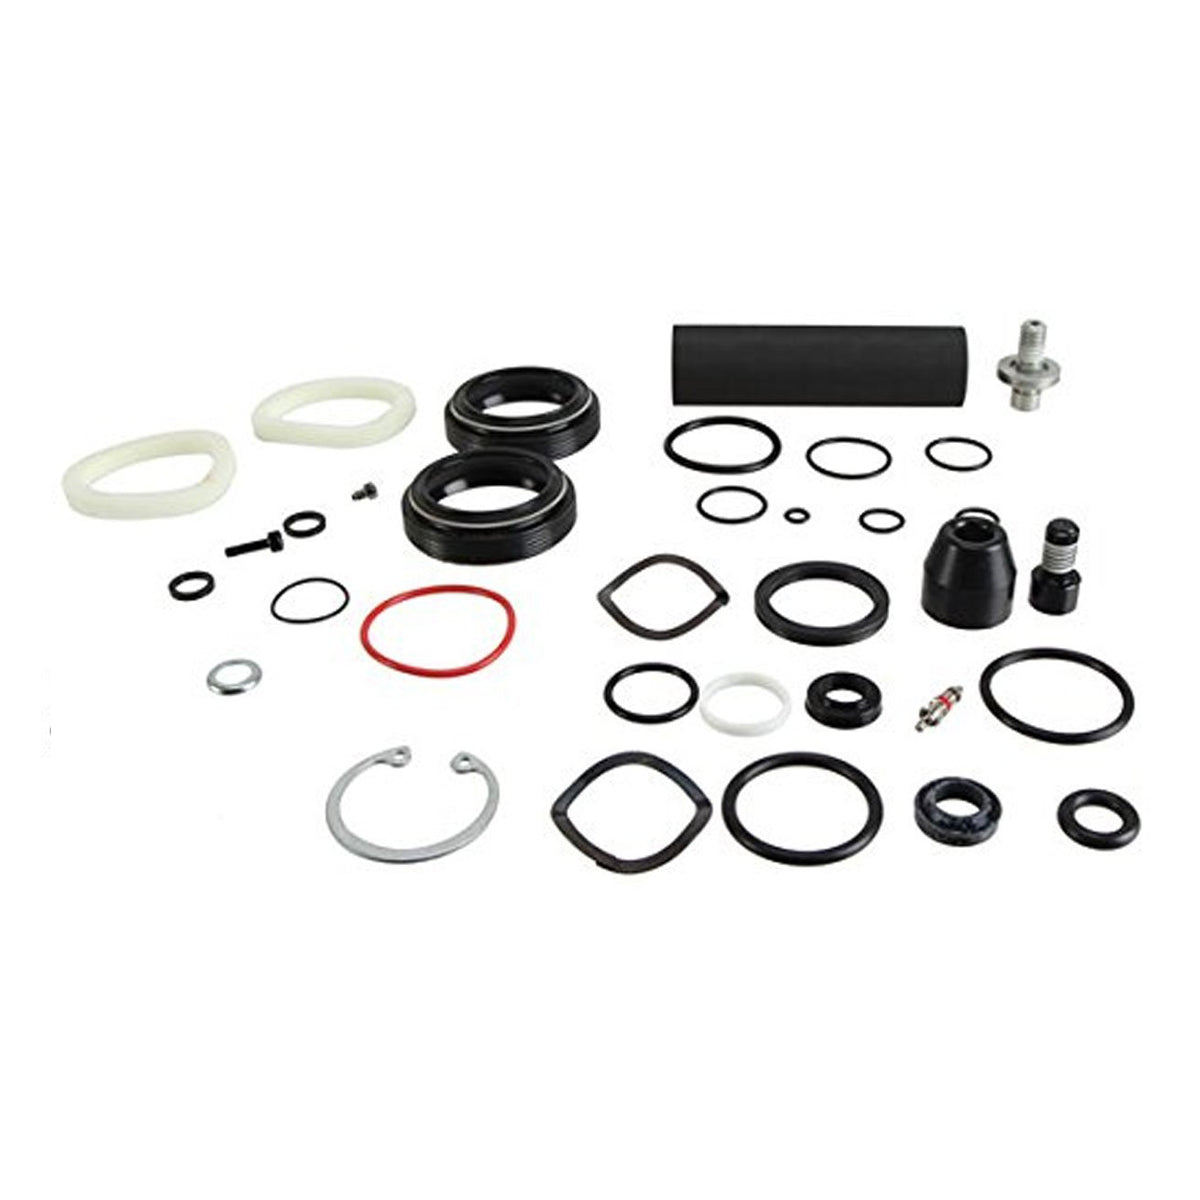 Rockshox Spare - Front Suspension Service Kit Full - Pike Solo Air Upgraded Includes Upgraded Sealhead, Solo Air And Damper Seals And Hardware)